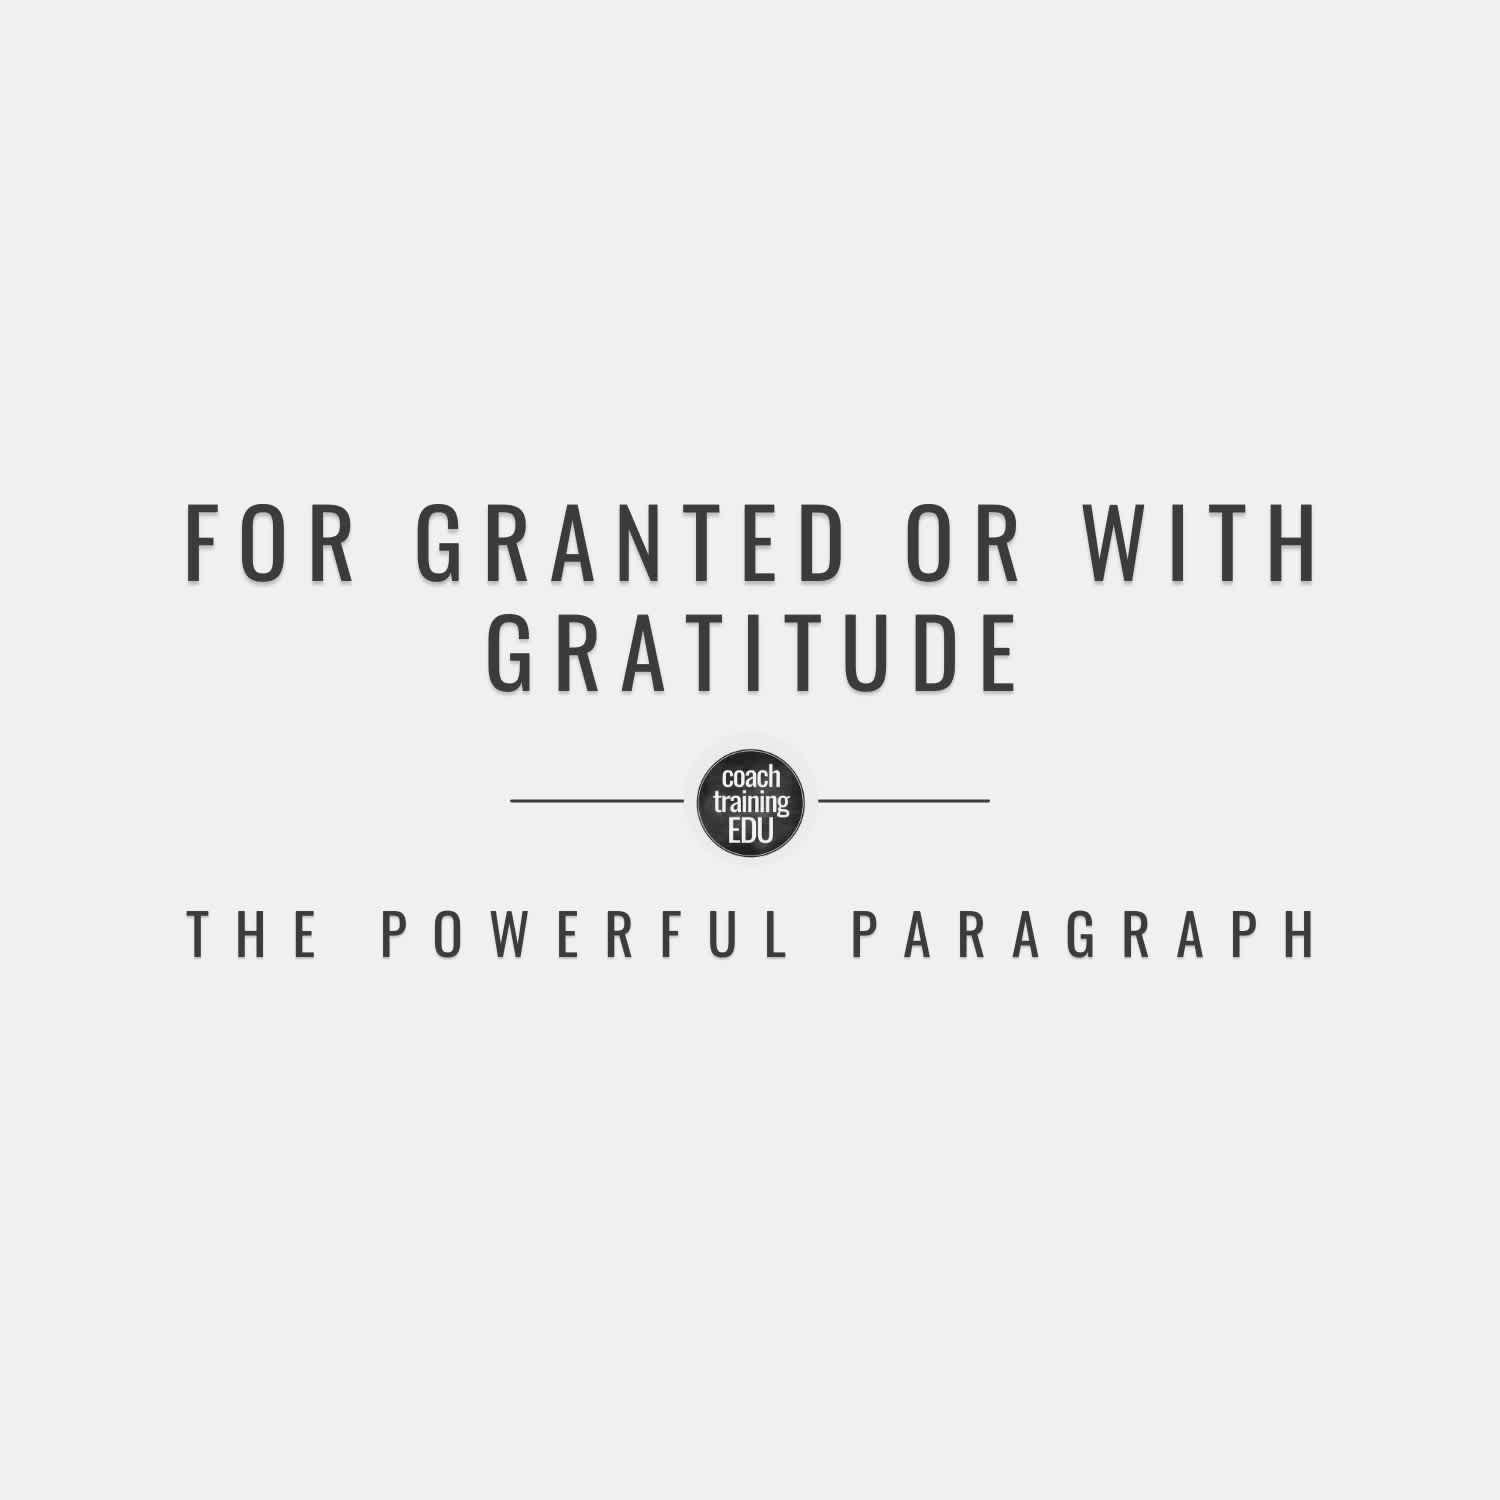 For Granted or With Gratitude